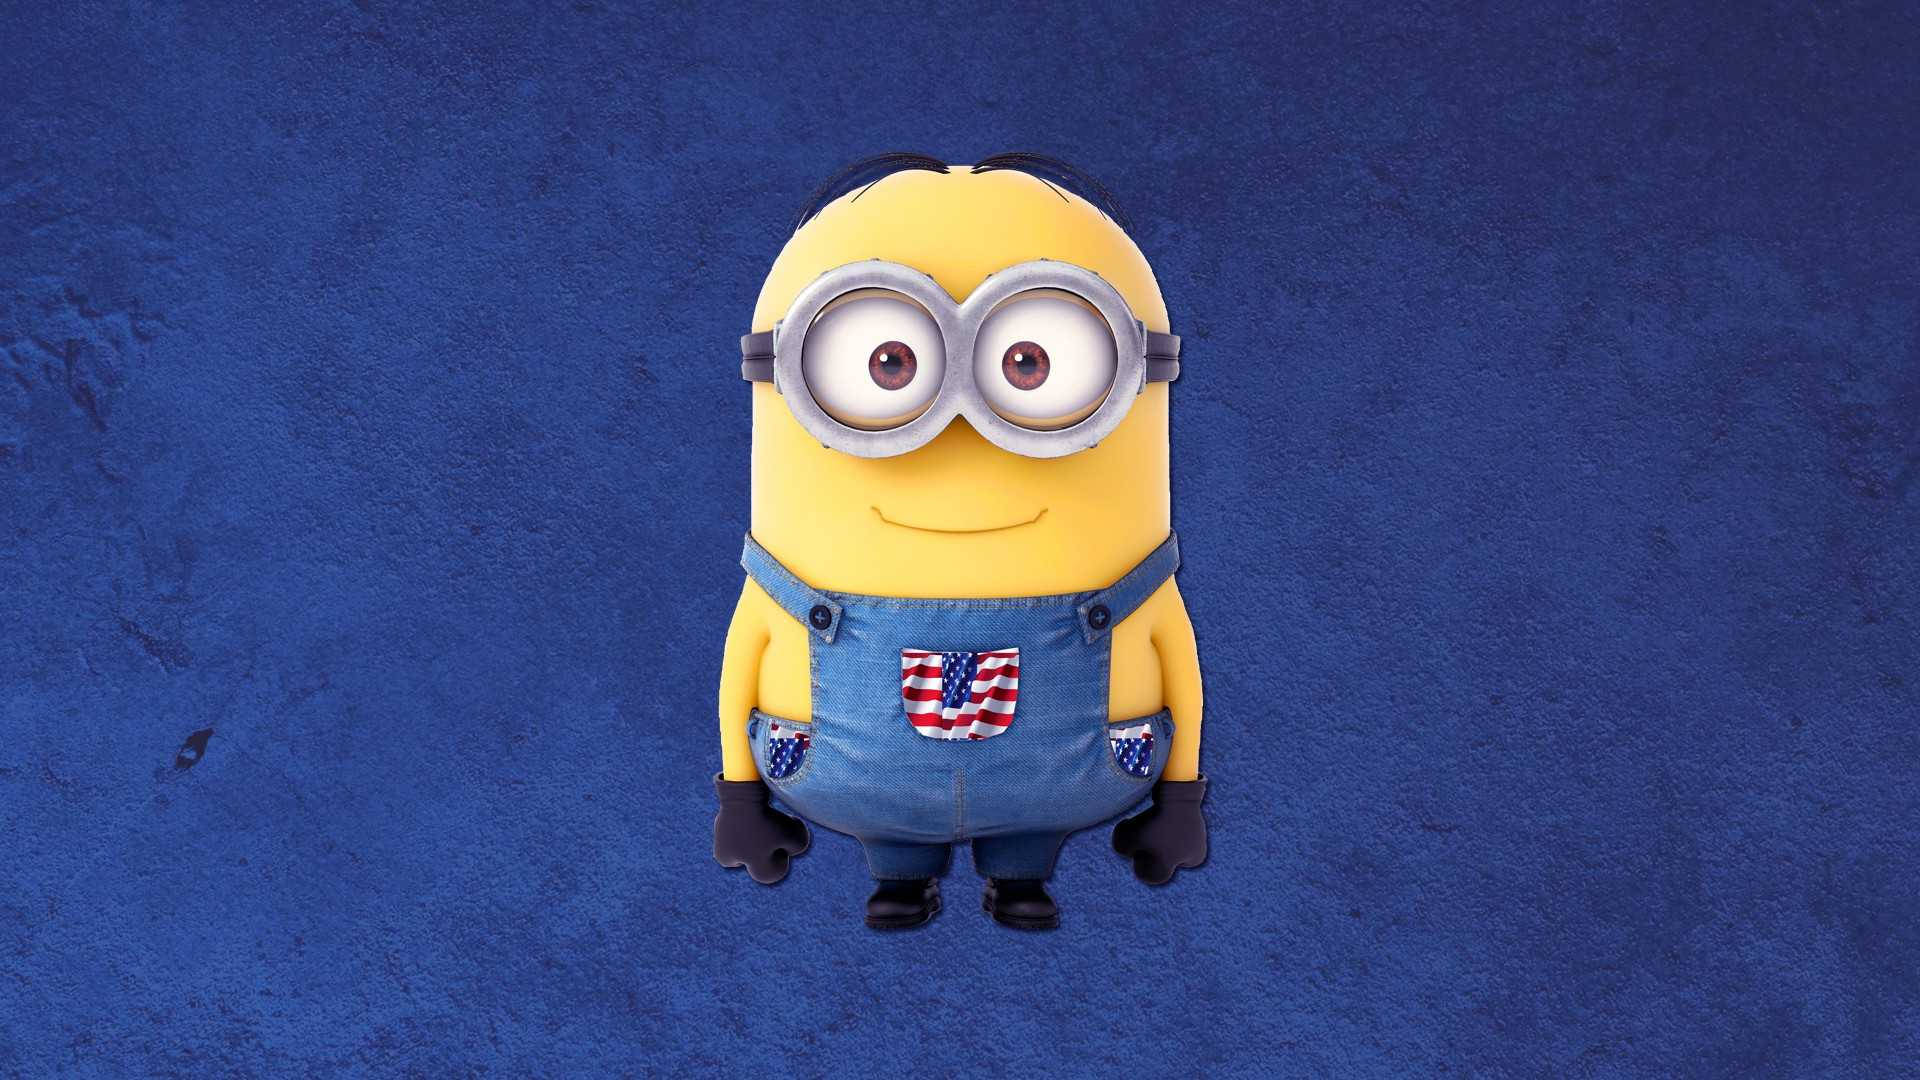 Minion Desktop In Overall With American Flag